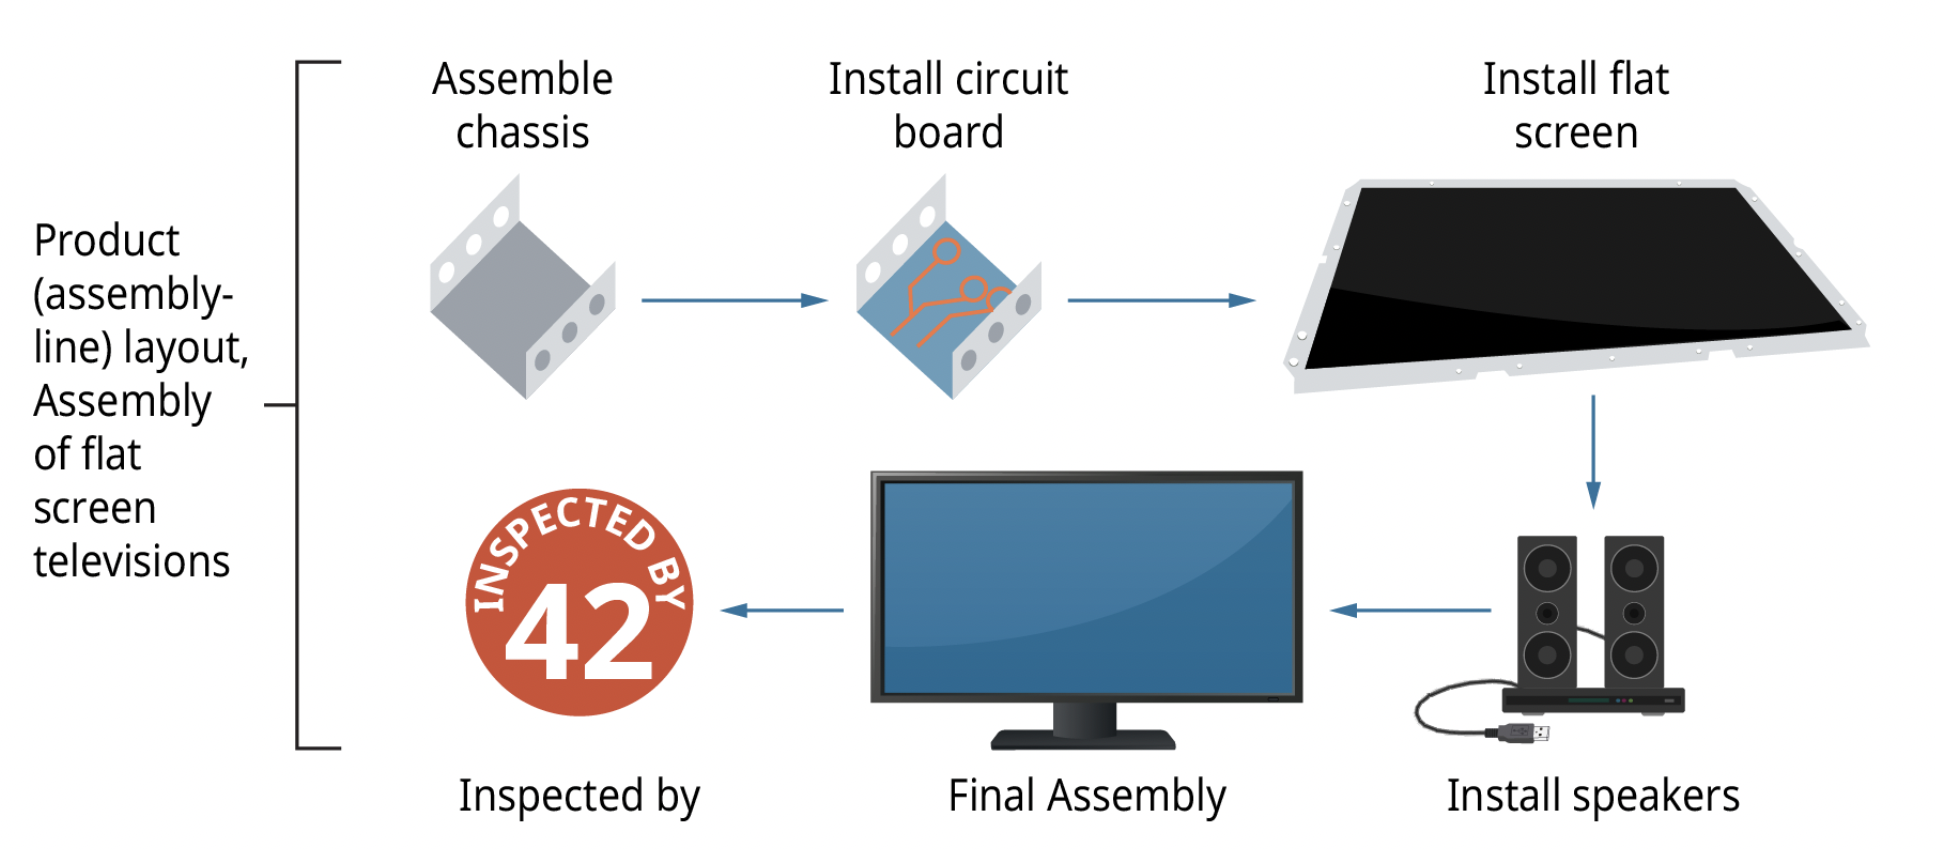 Product (assembly-line) layout, Assembly of flat screen televisions: assemble chassis, install circuit board, install flat screen, install speakers, final assembly, inspected by.